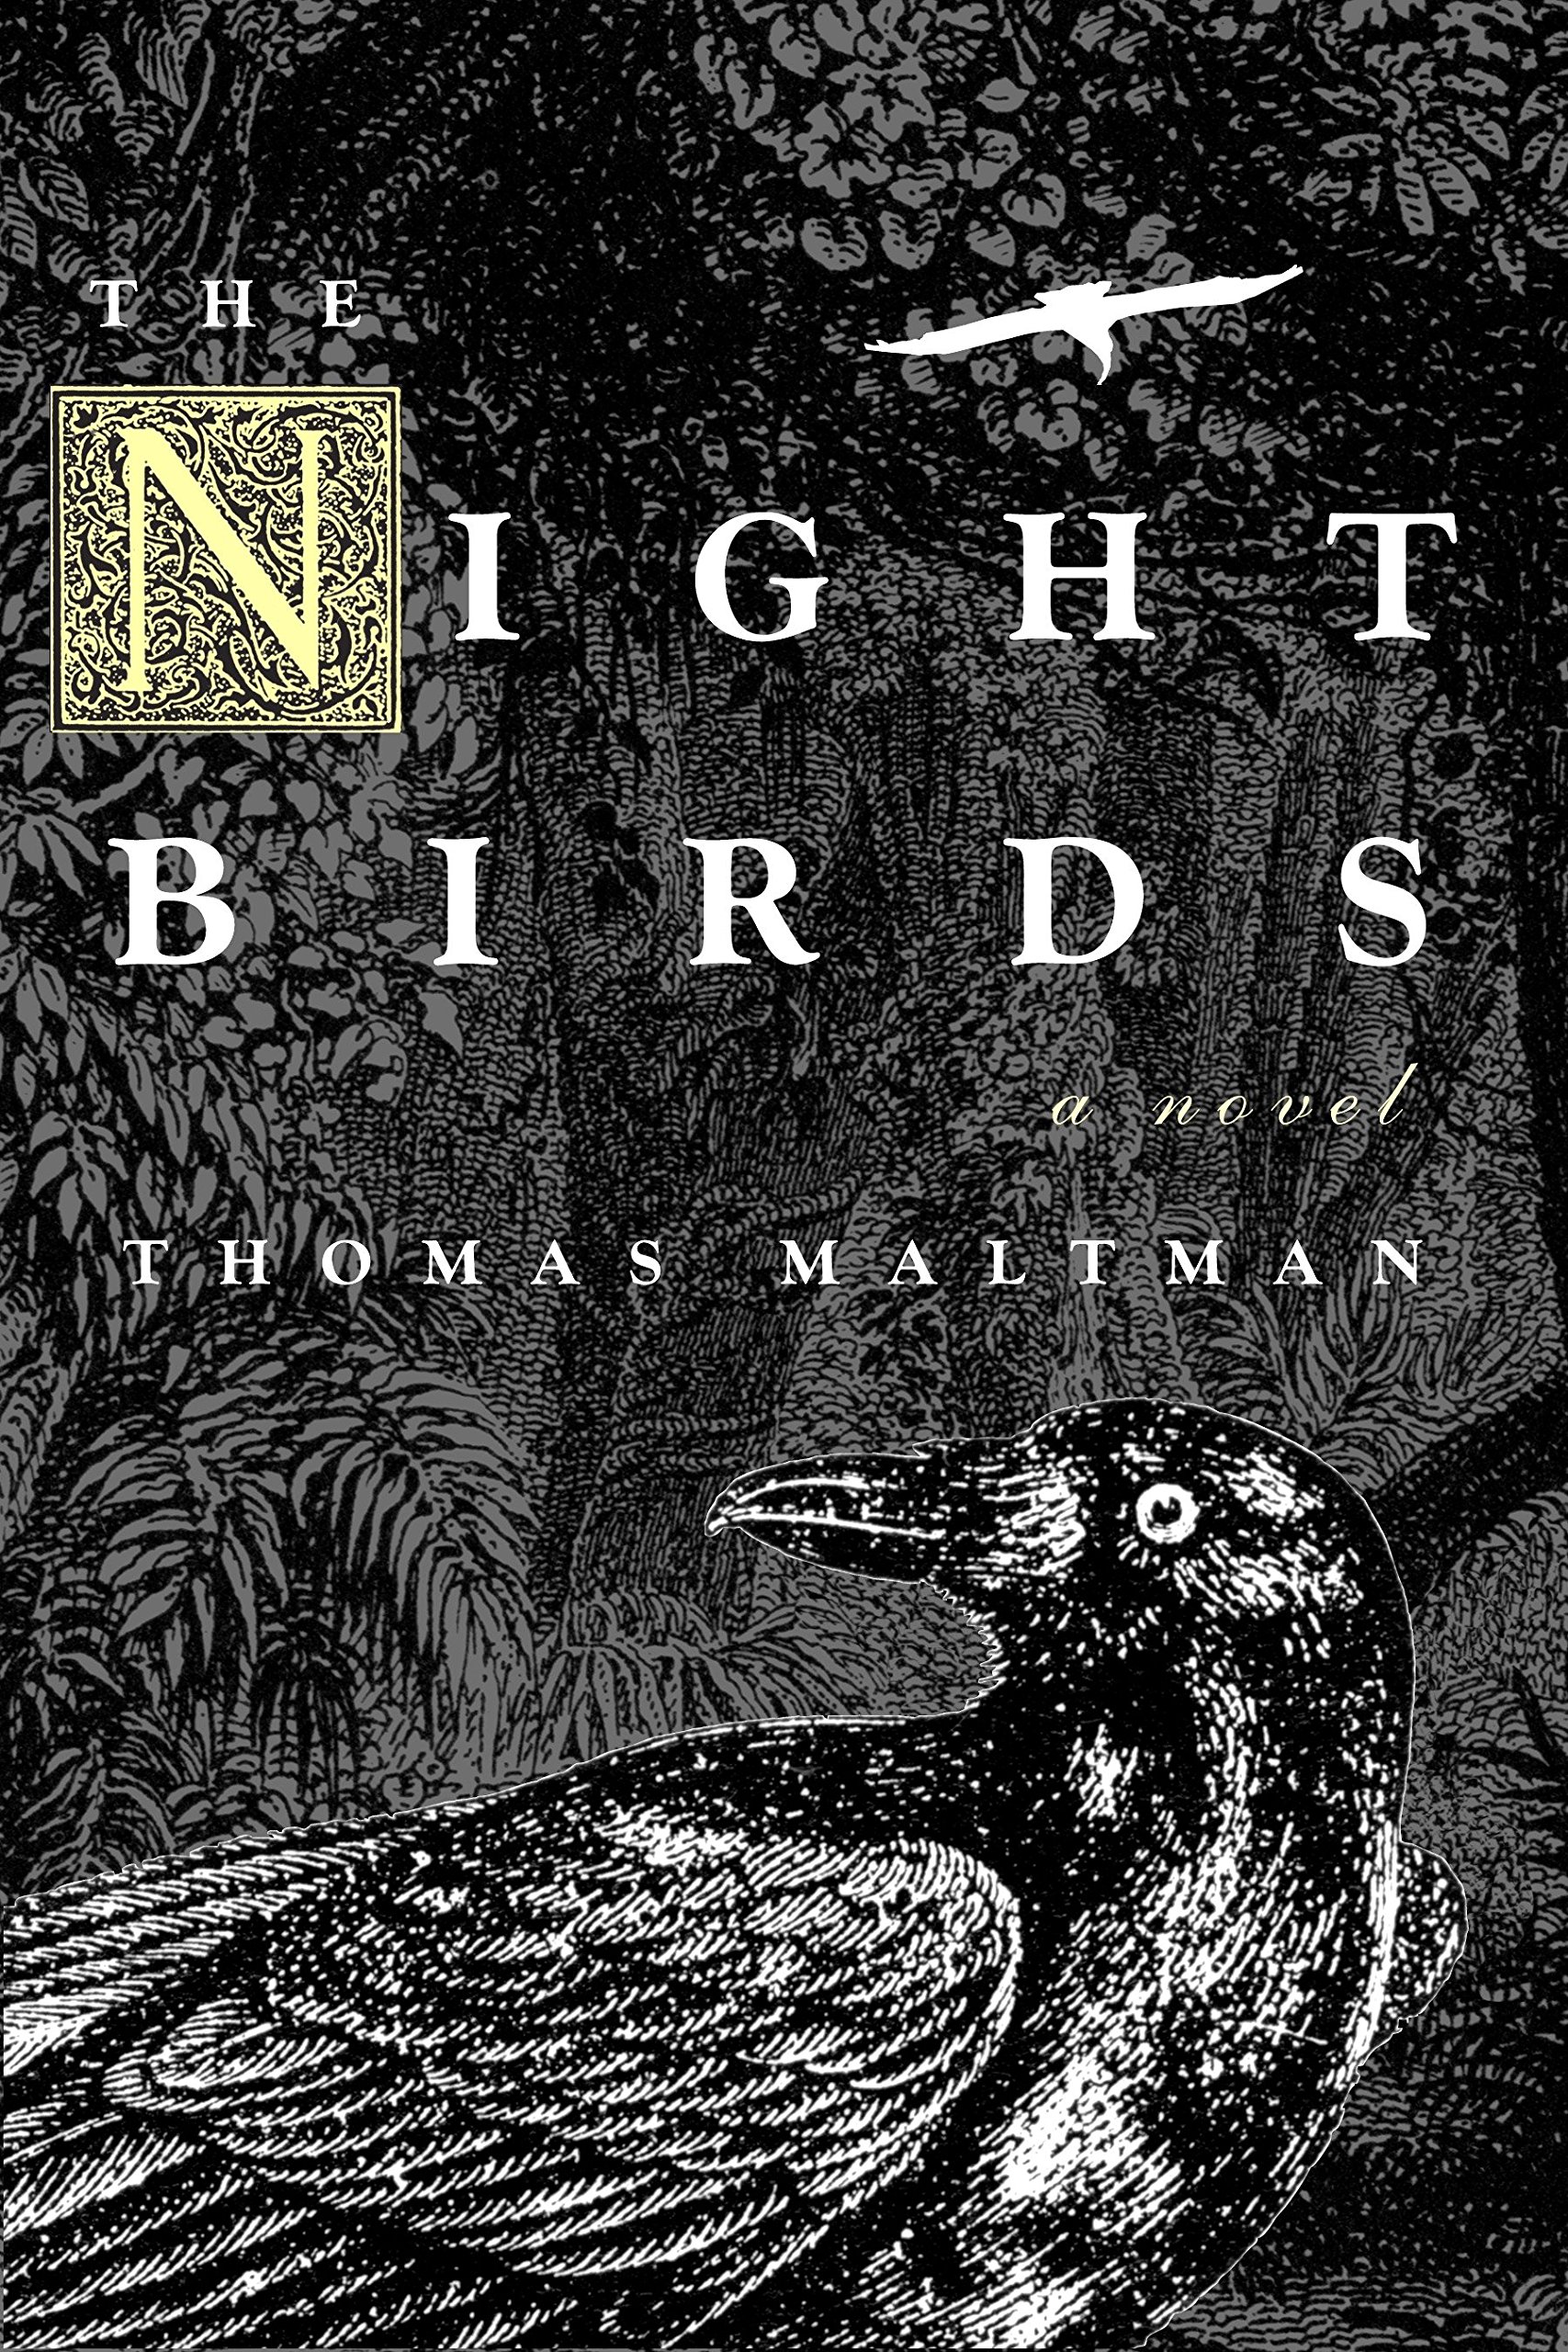 See The Night Birds in Library Catalog